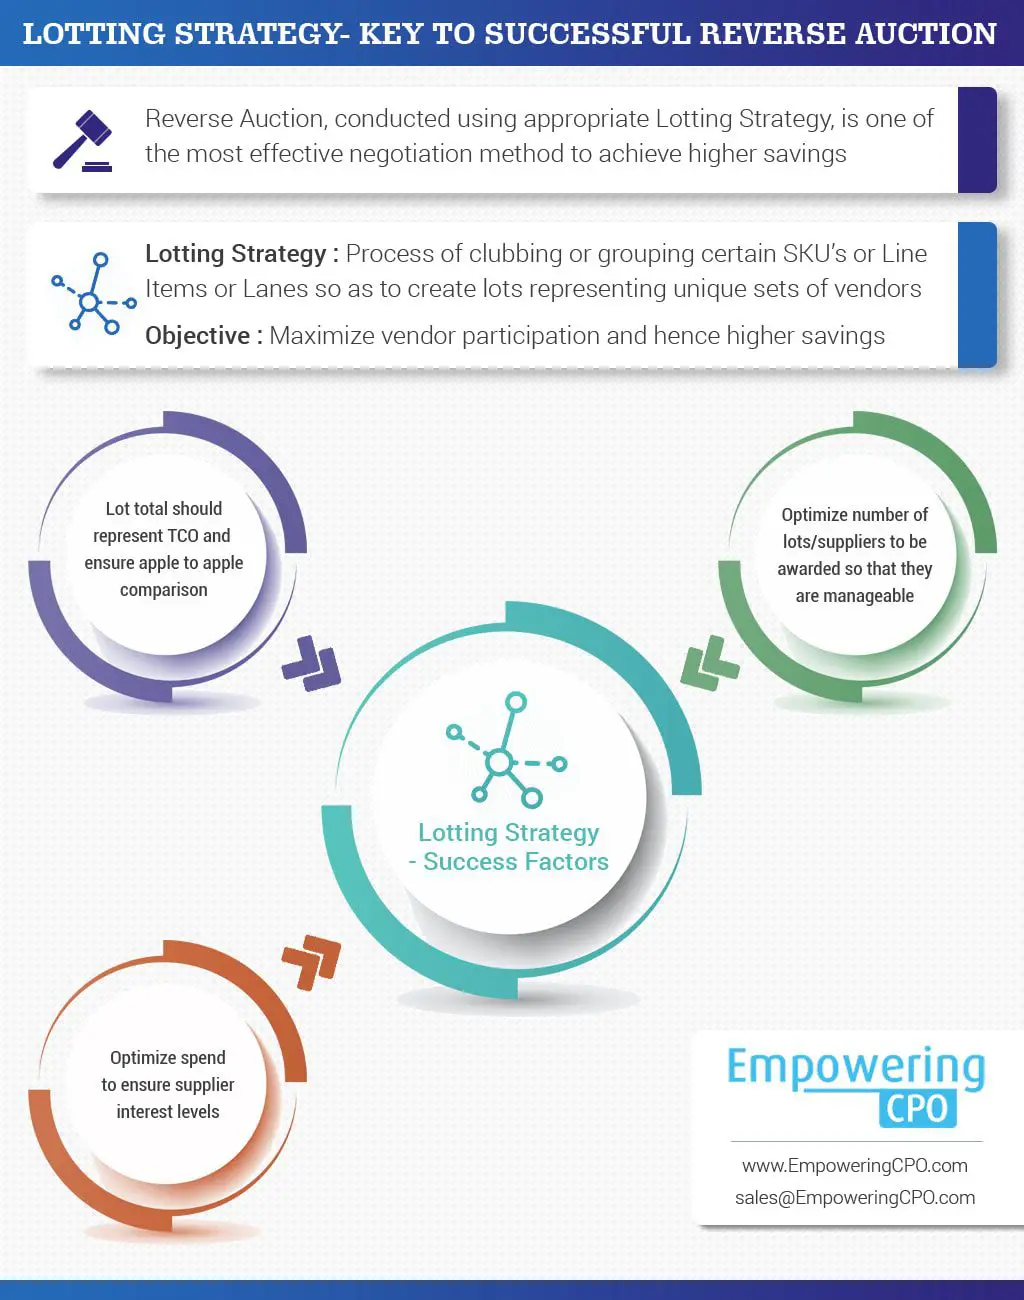 Infographic explaining the Lotting Strategy in Reverse Auctions, detailing its definition, objective, and success factors.